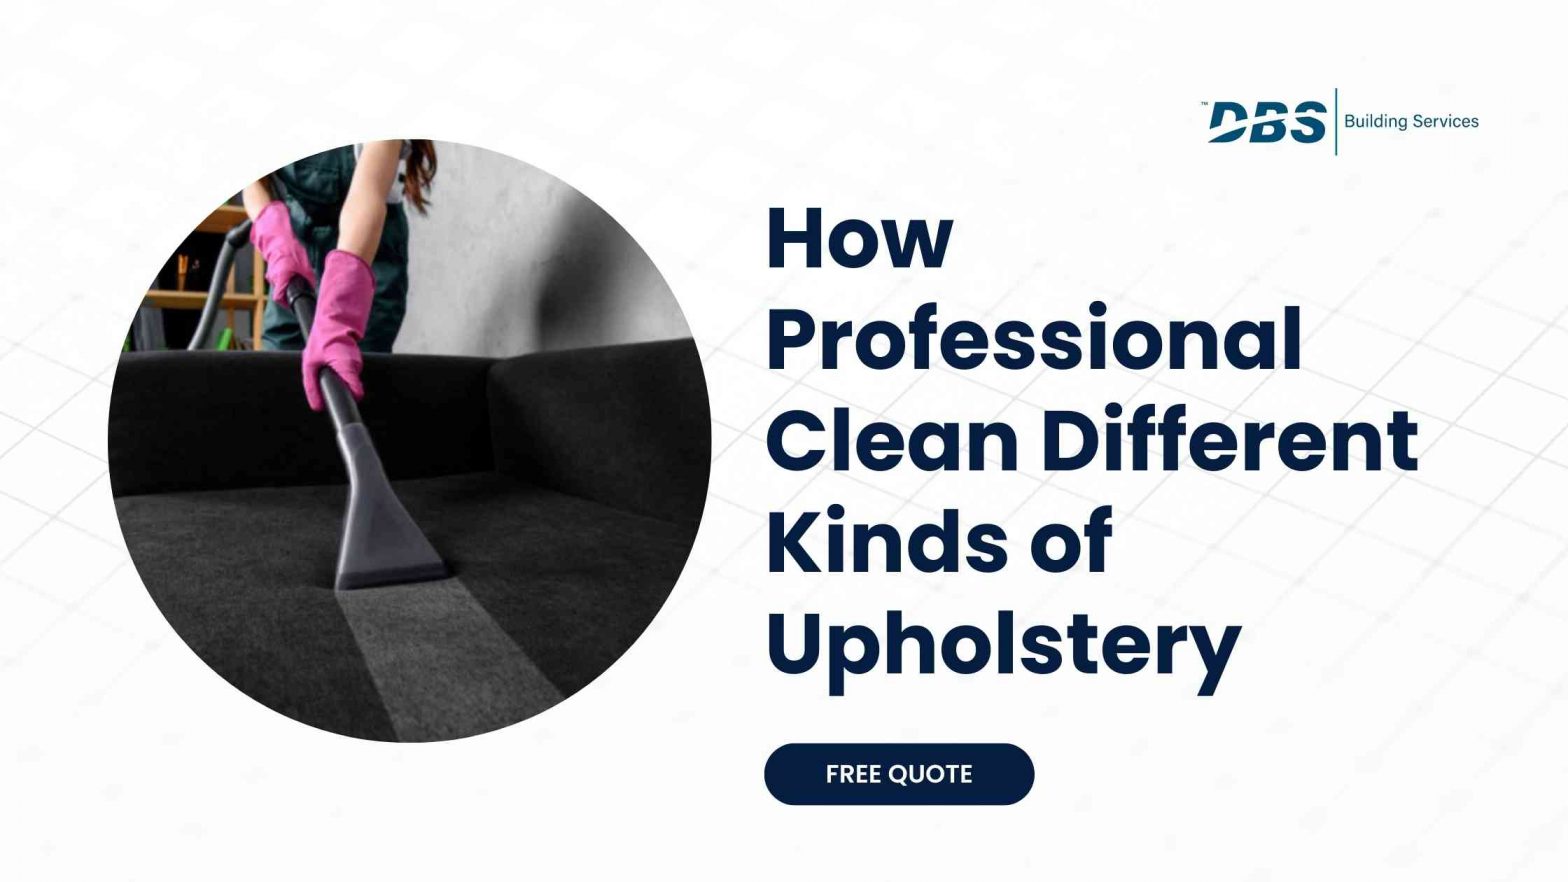 How Professional Clean Different Kinds of Upholstery